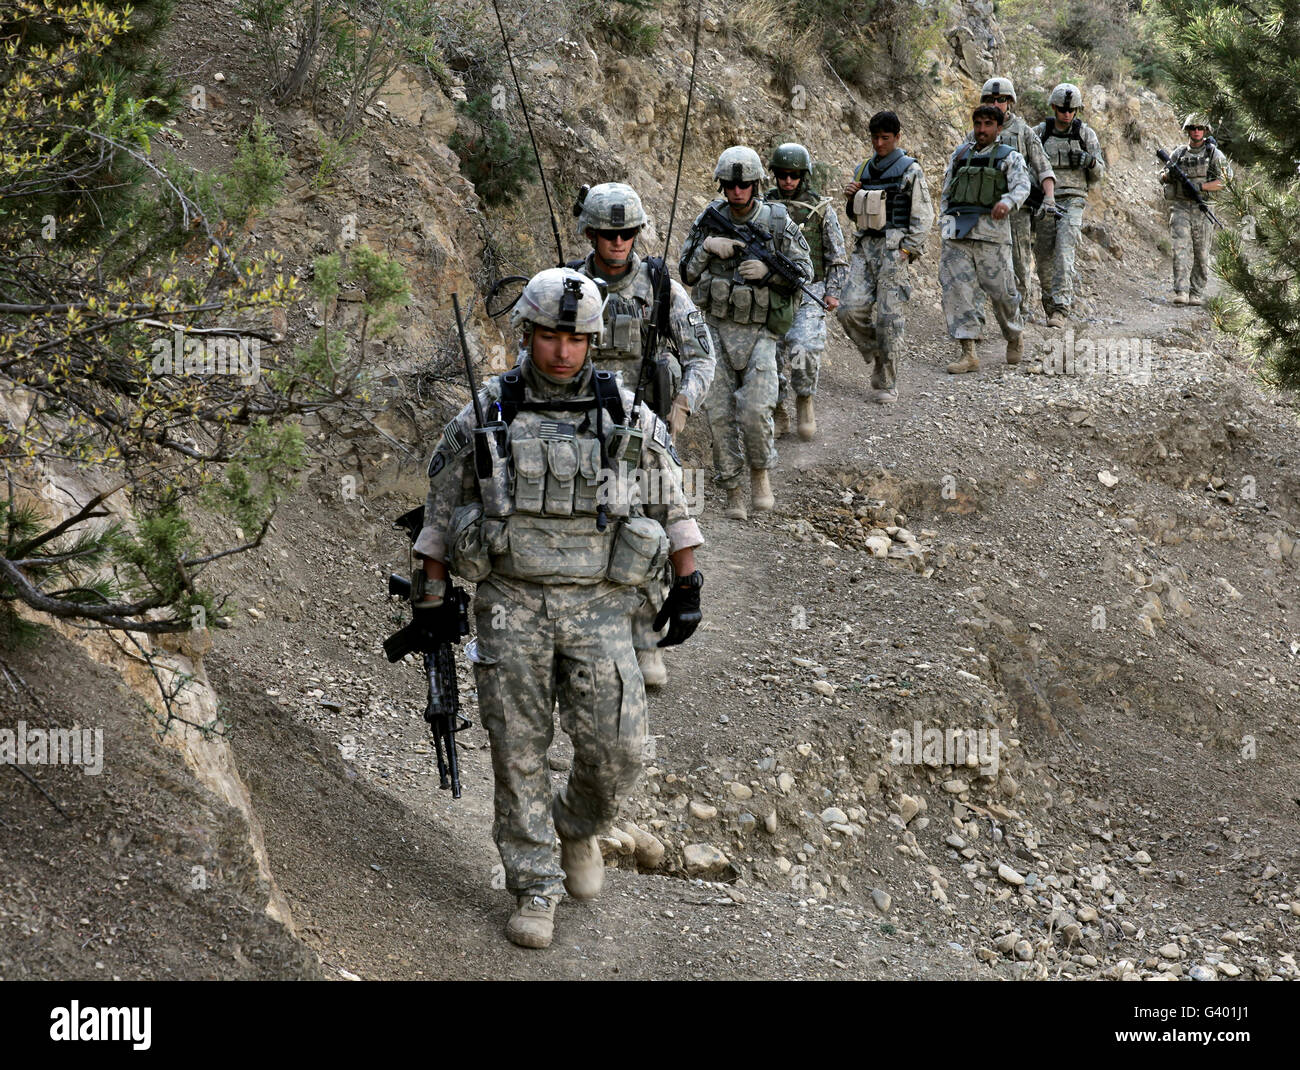 U.S. Soldiers and Afghan Border Policemen walk along a mountain trail in Afghanistan. Stock Photo